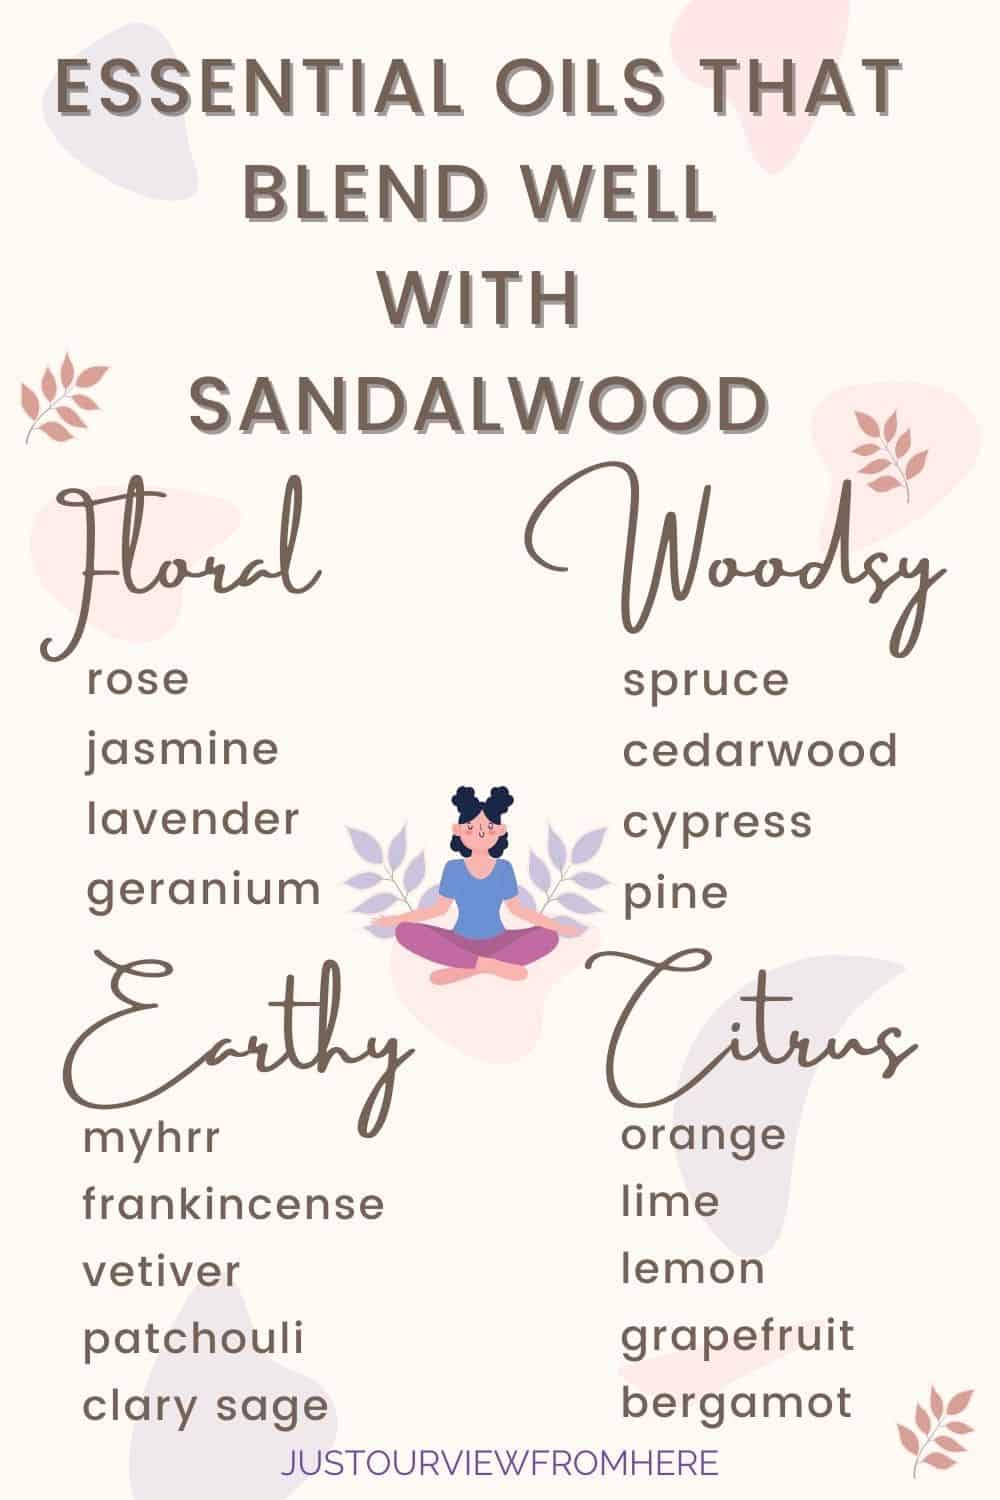 what scents go well with sandalwood?